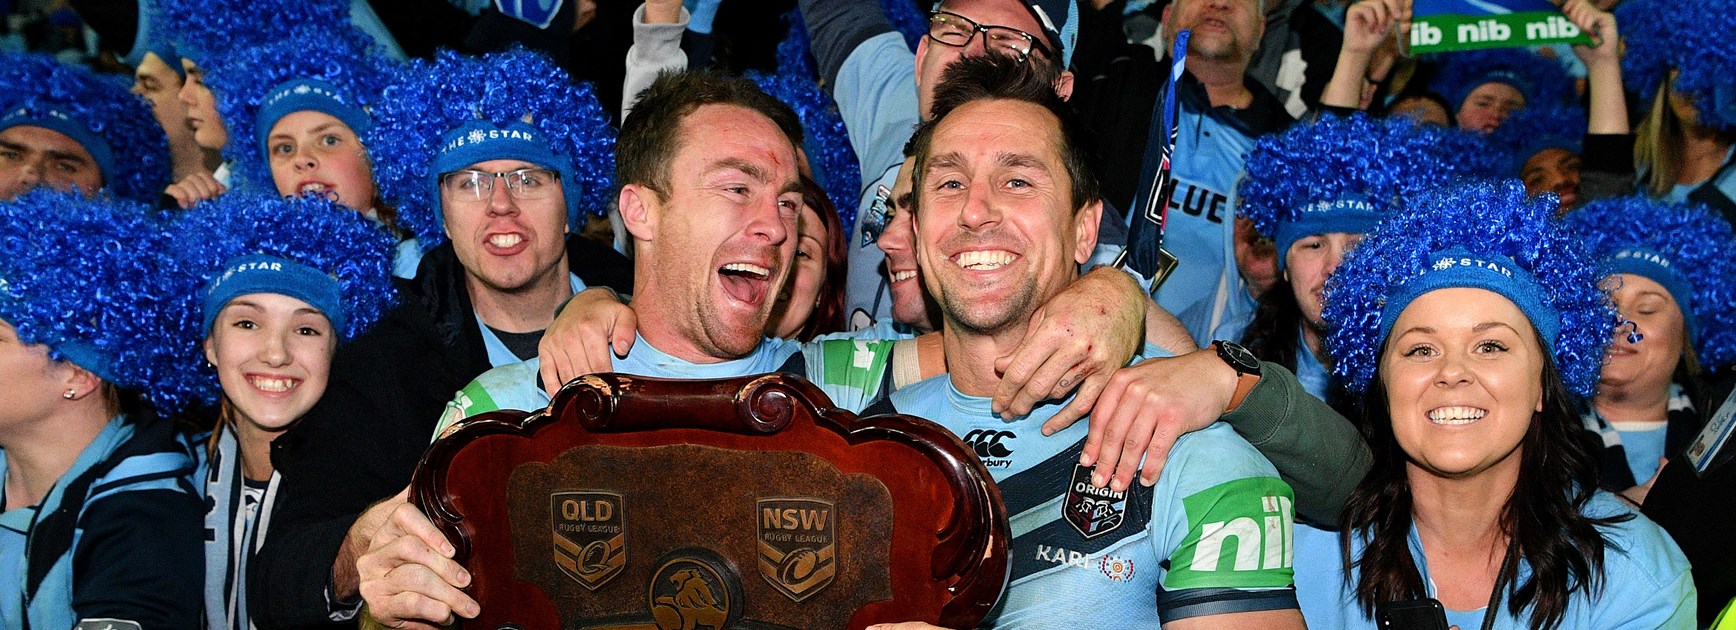 NSW series win in Mitchell Pearce’s words